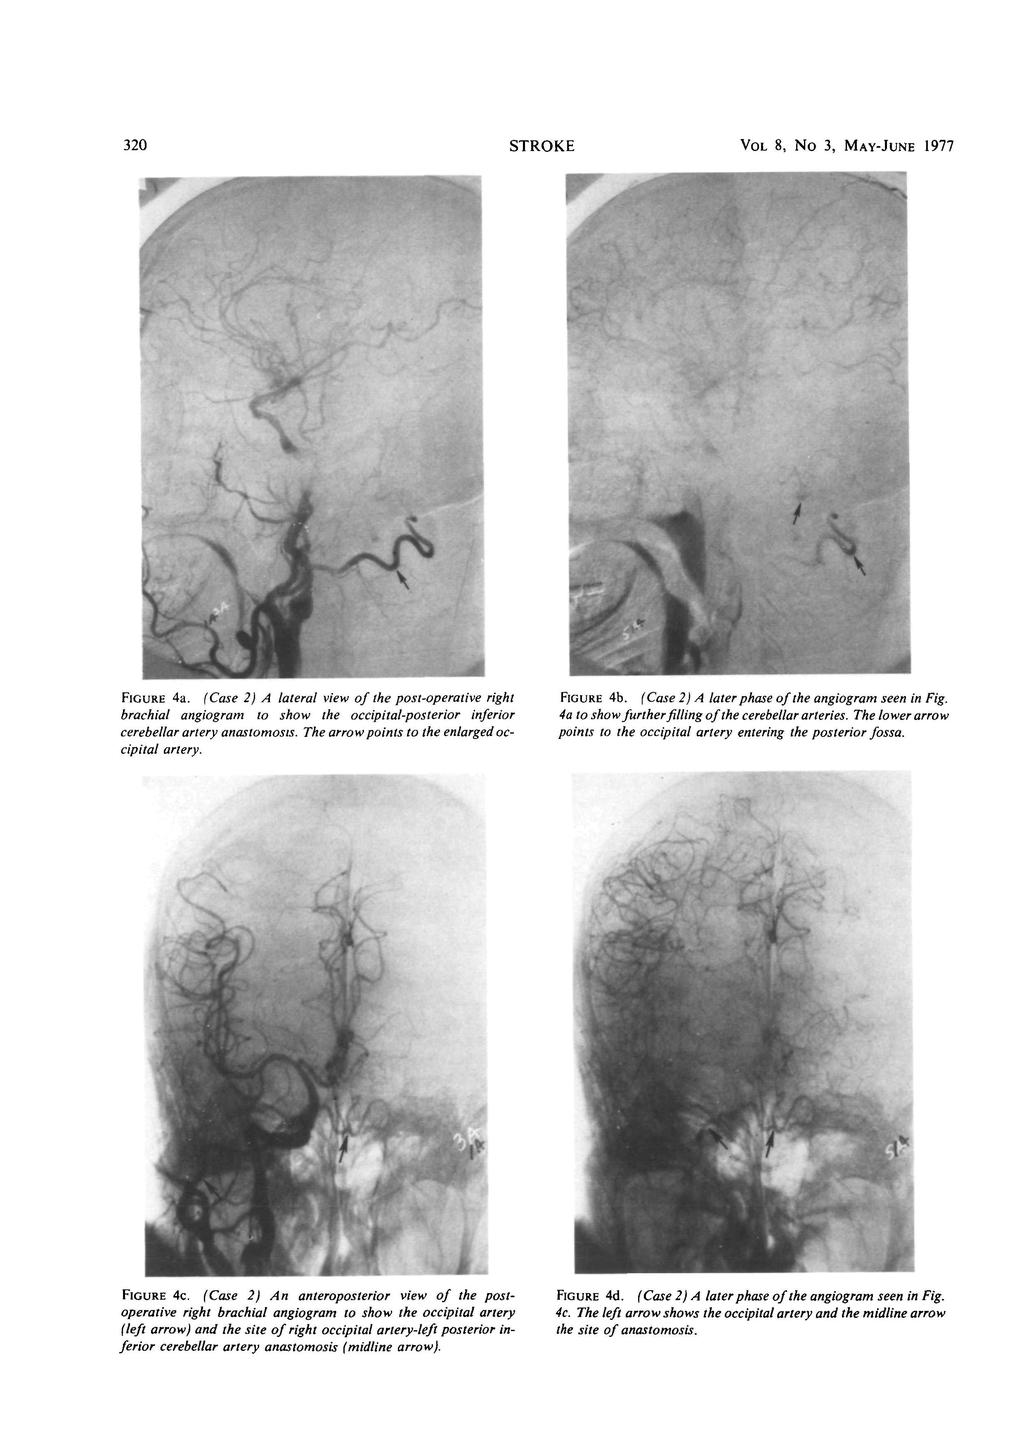 320 STROKE VOL 8, No 3, MAY-JUNE 1977 FIGURE 4a. (Case 2) A lateral view of the post-operative right brachial angiogram to show the occipital-posterior inferior cerebellar artery anastomosis.